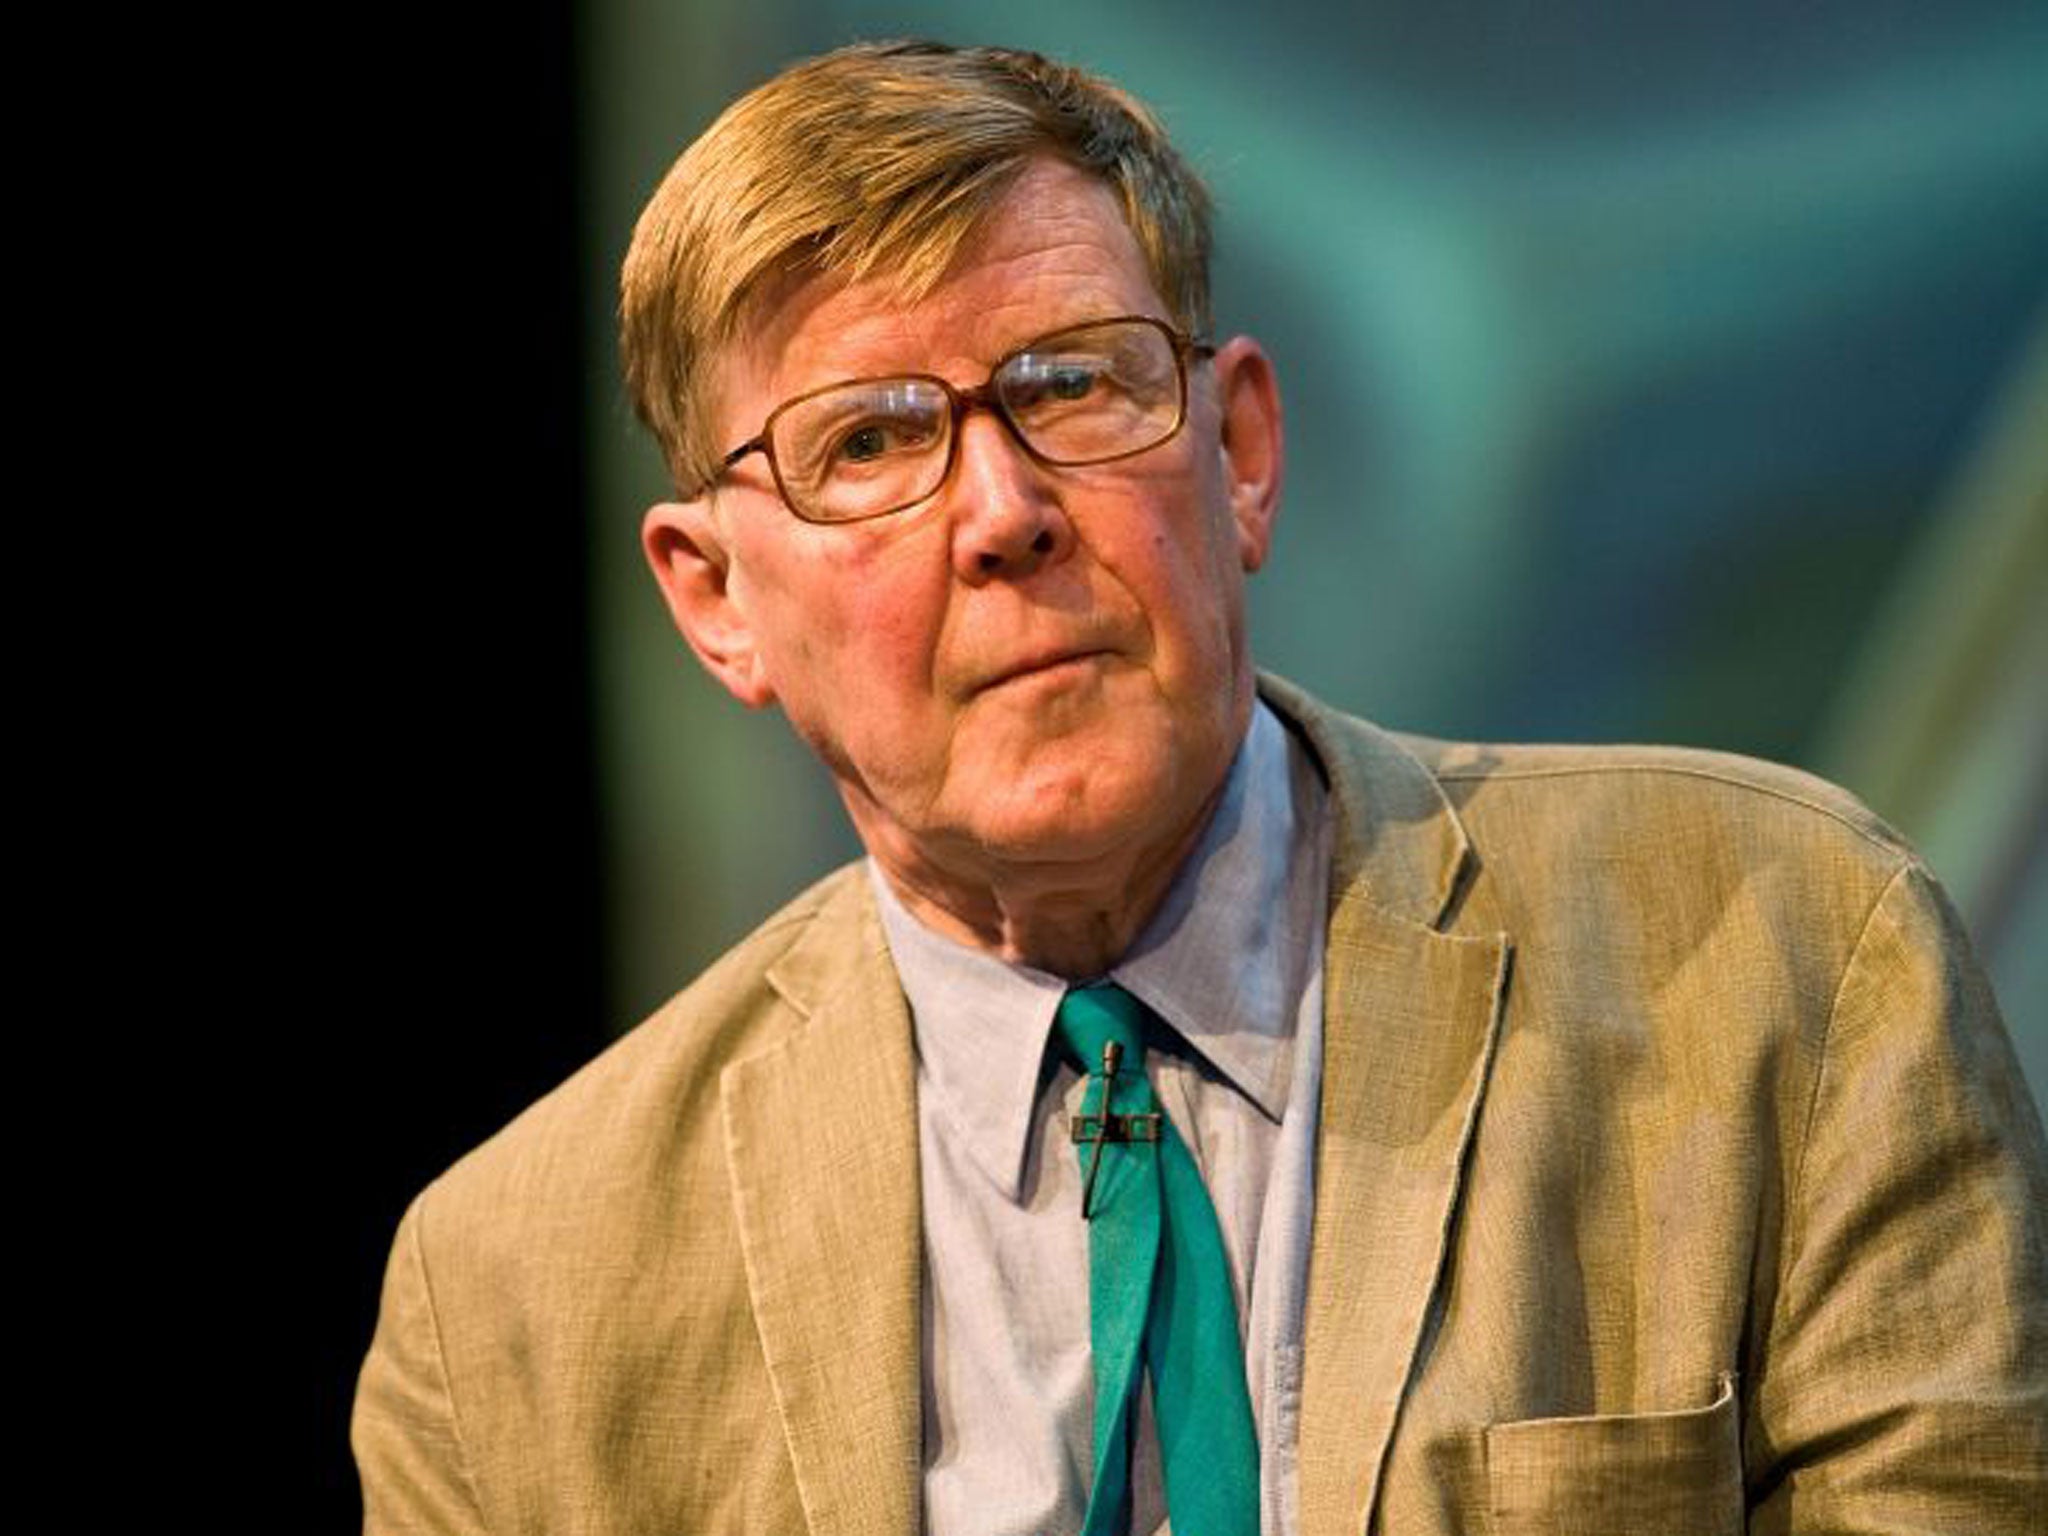 Alan Bennett raised eyebrows with his sympathetic portrayal of Hector, the teacher forced to step down for fondling his teenage pupils